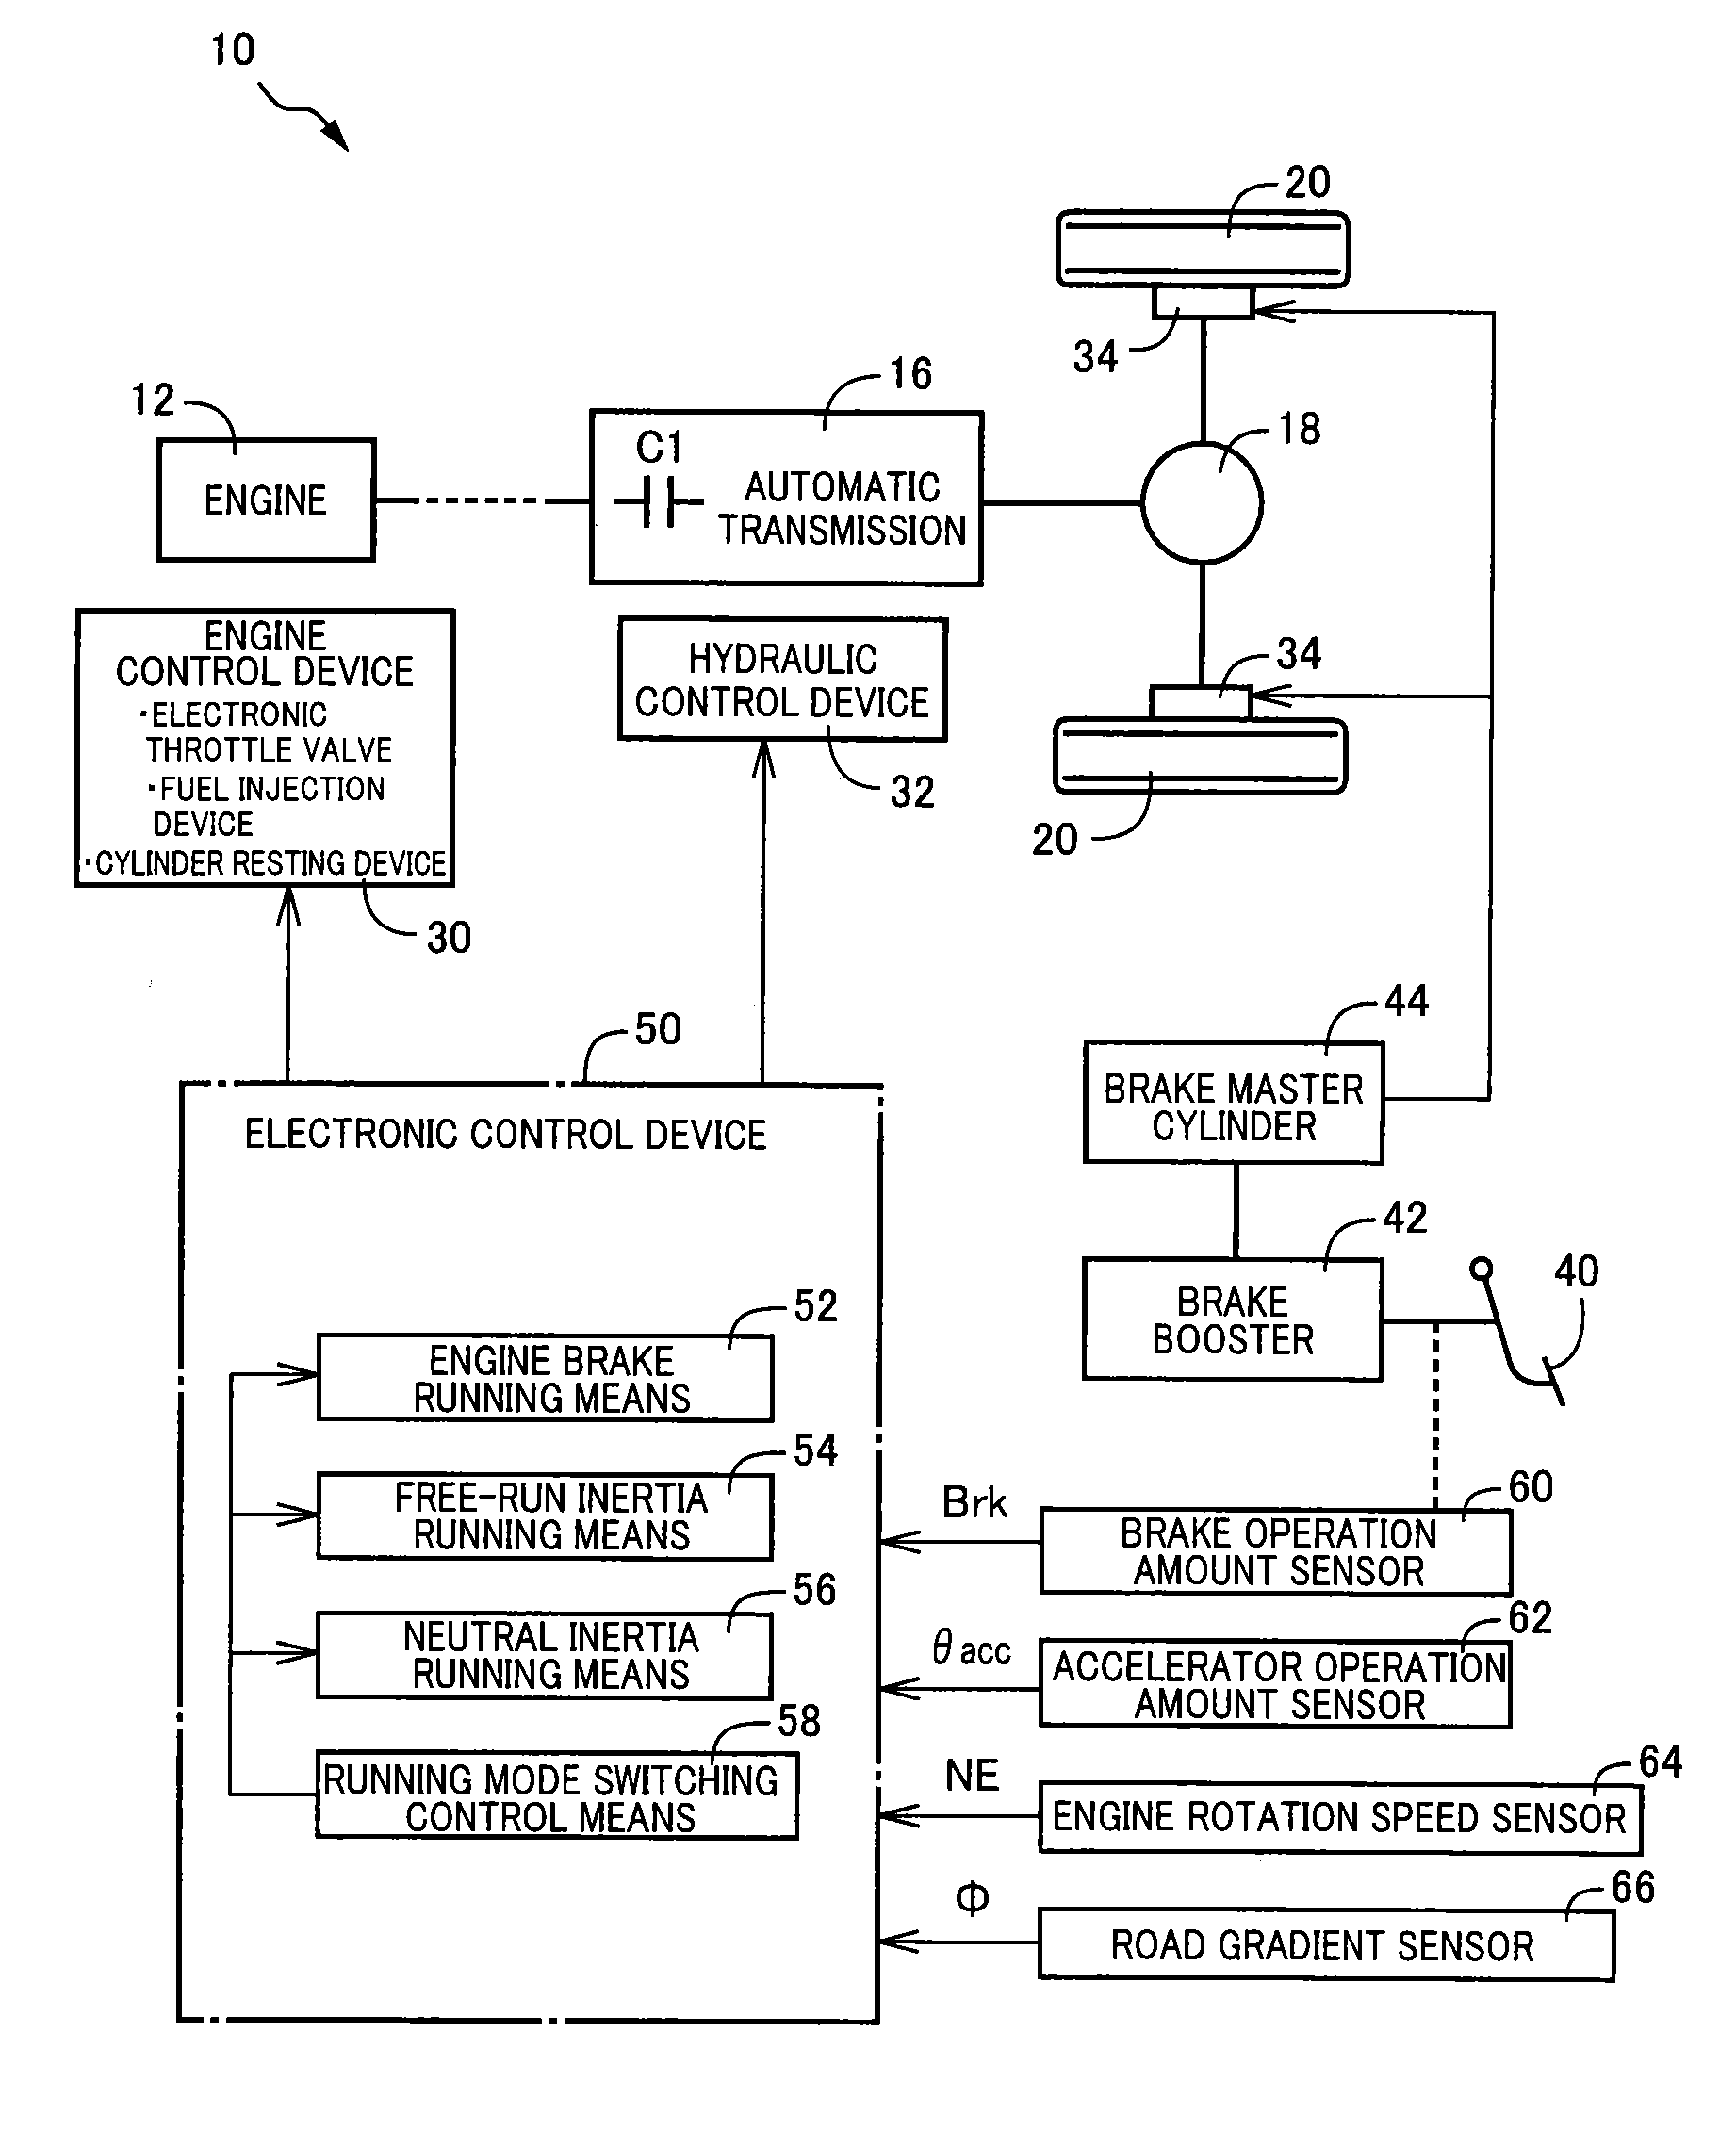 Vehicle travel controller